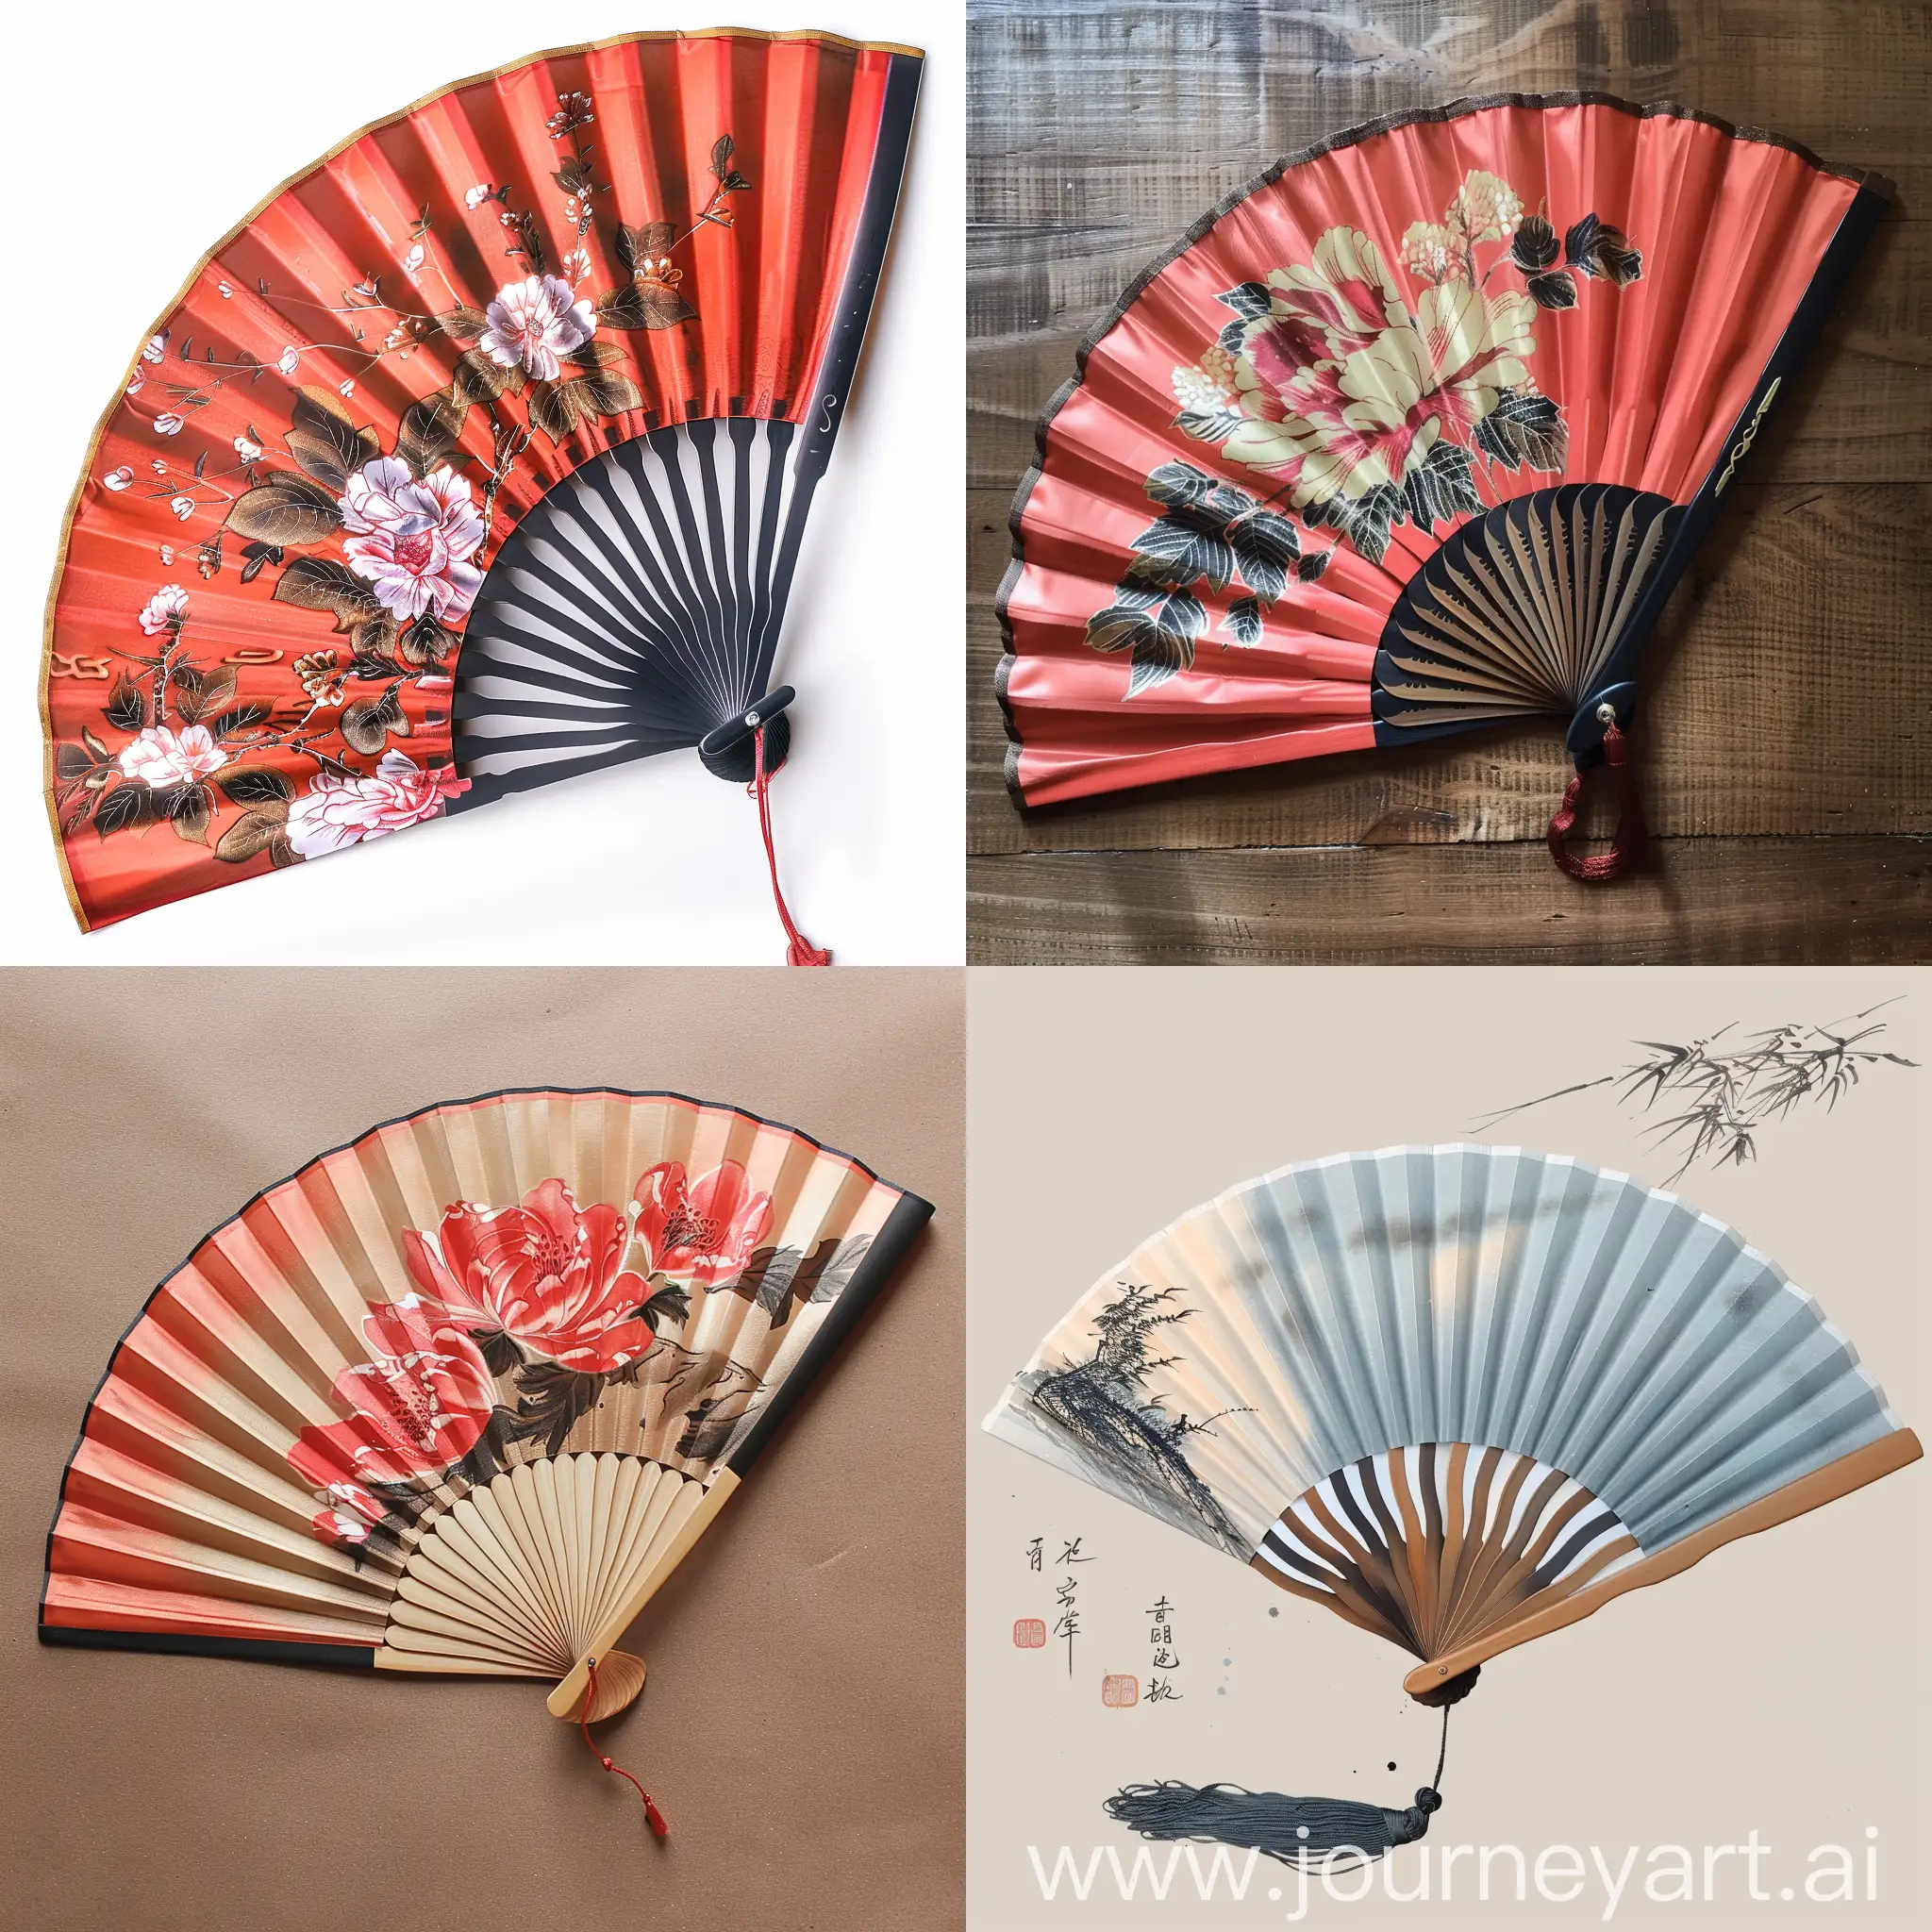 Traditional-Chinese-Fan-Craftsmanship-Exquisite-Artistry-and-Cultural-Heritage